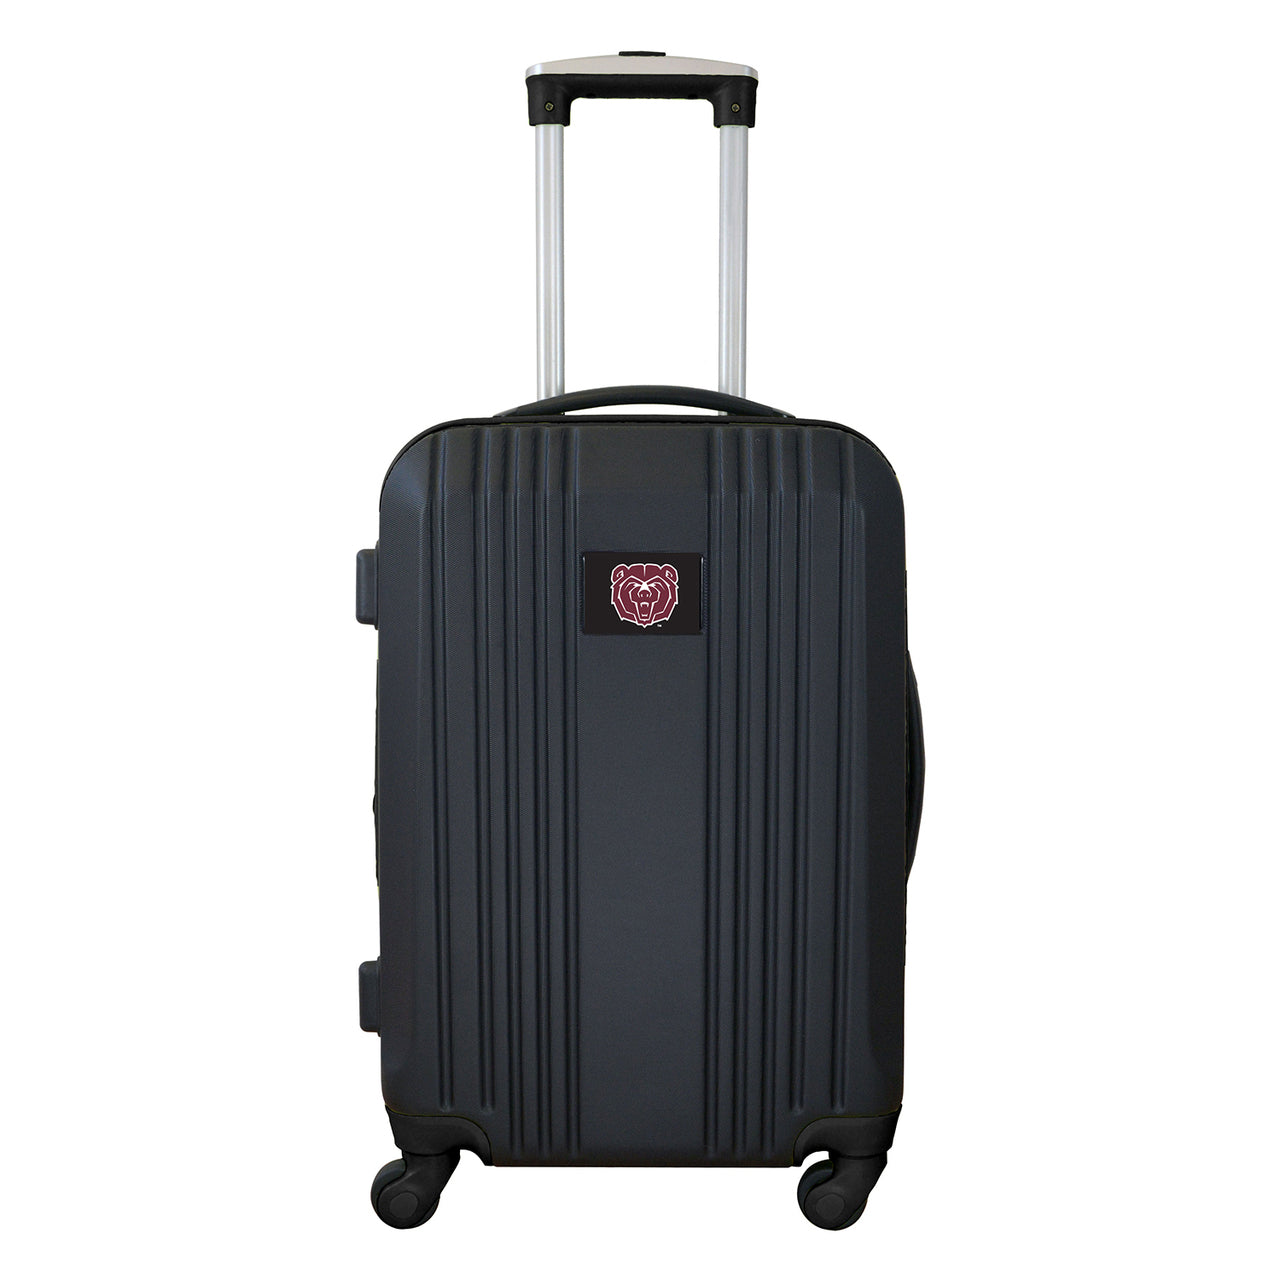 Missouri State Carry On Spinner Luggage | Missouri State Hardcase Two-Tone Luggage Carry-on Spinner in Black